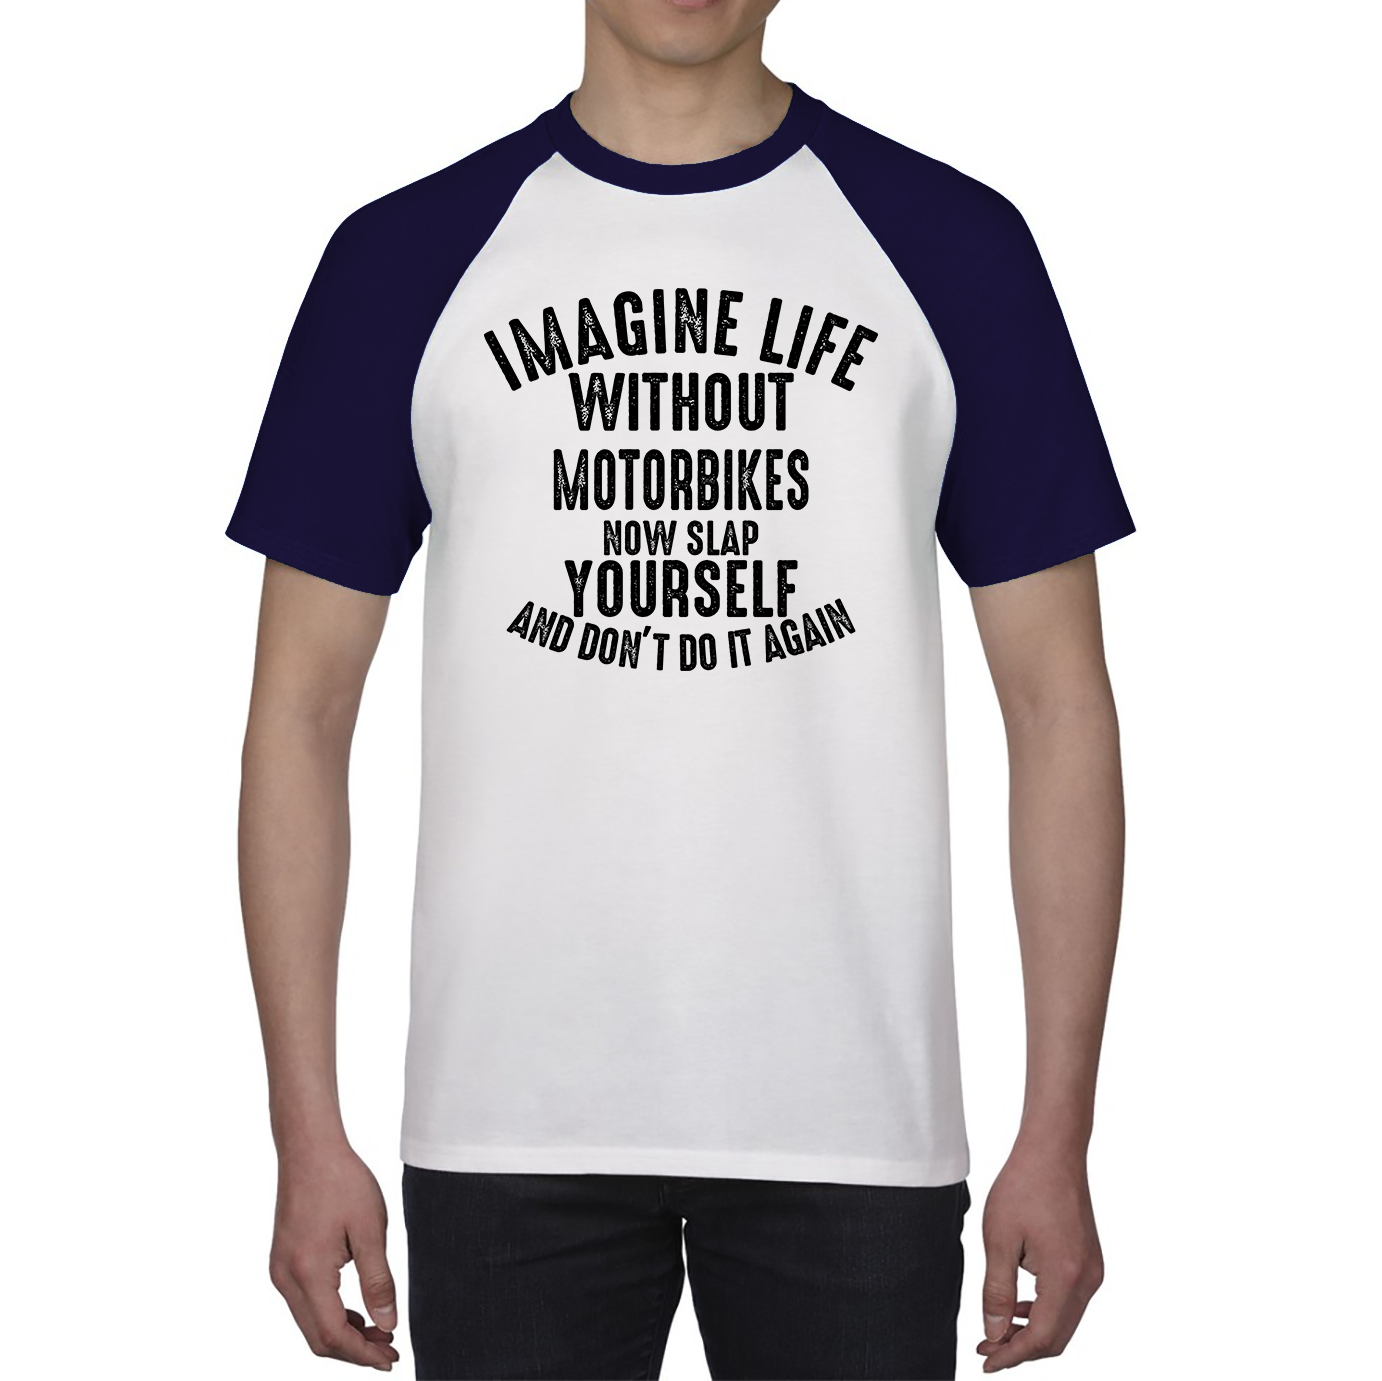 Imagine Life Without Motorbikes Now Slap Yourself And Don' Do It Again Shirt Bike Lovers Racers Riders Funny Joke Baseball T Shirt